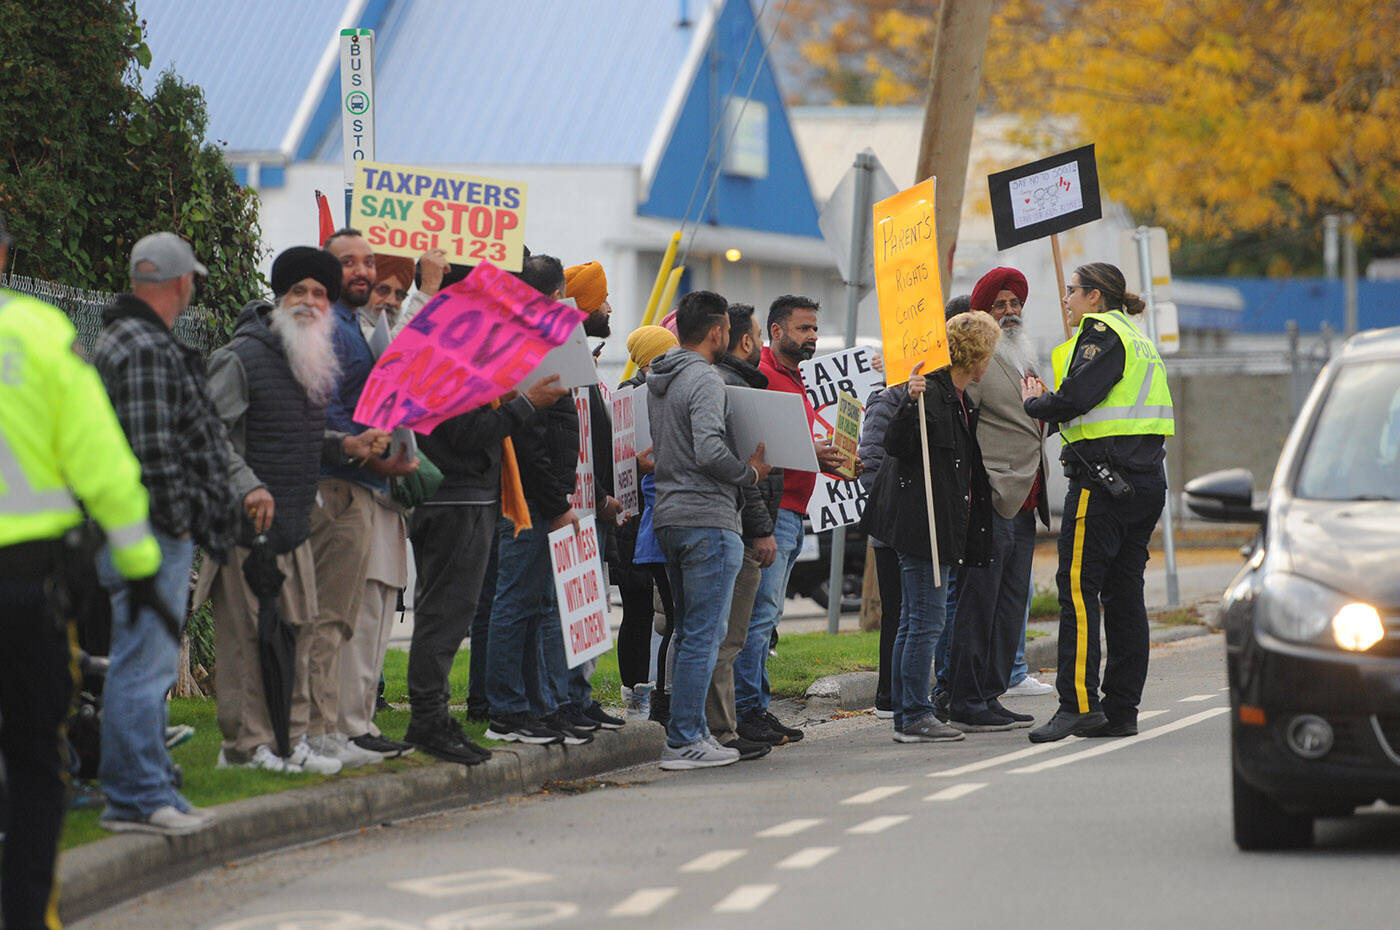 An officer asks protesters to step off the road at an anti-SOGI 123 rally in Chilliwack on Oct. 10. There has been a surge of protests in the Fraser Valley recently. The provincial government Wednesday tabled legislation to create buffer zones around schools. (Jenna Hauck/ Chilliwack Progress)